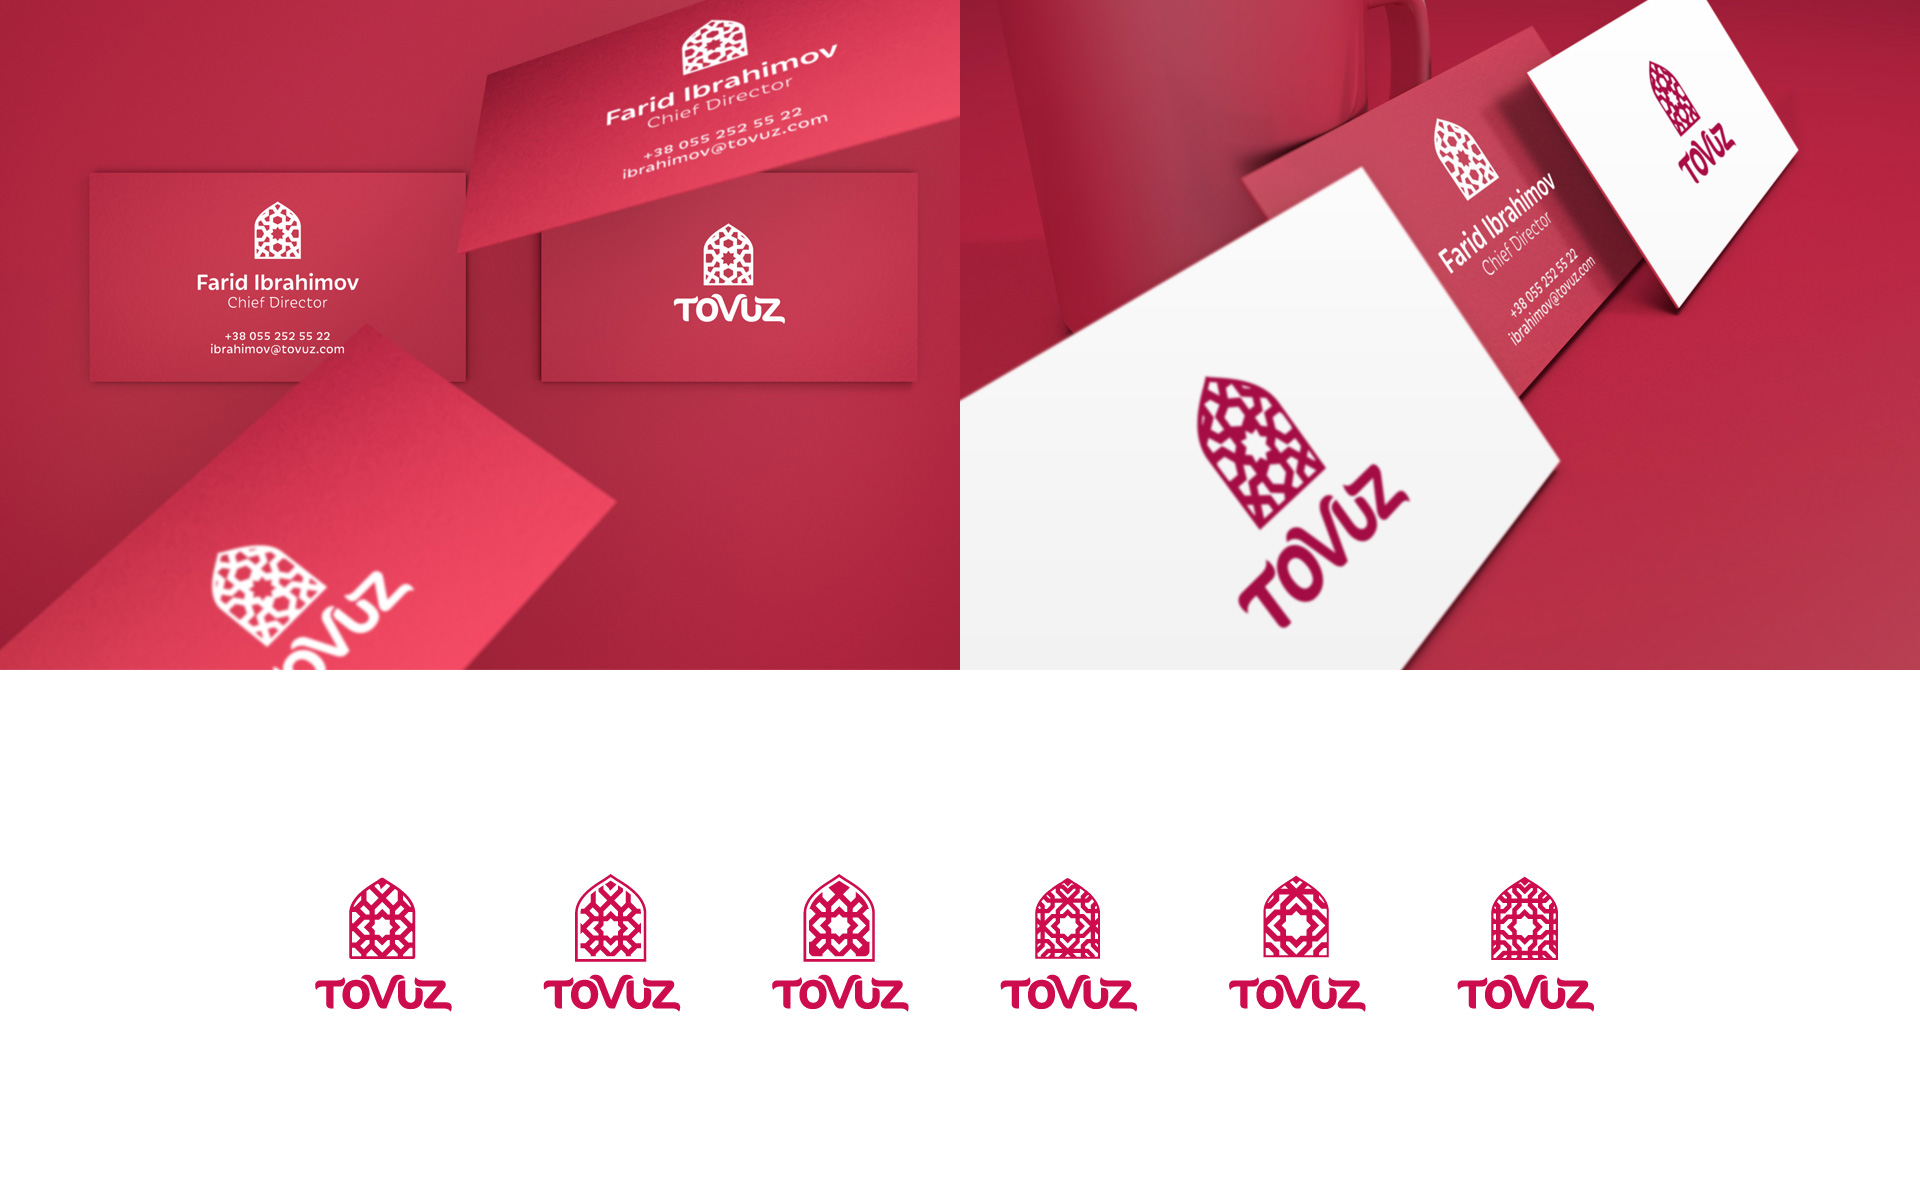 Different kinds of vcards and logos of the company